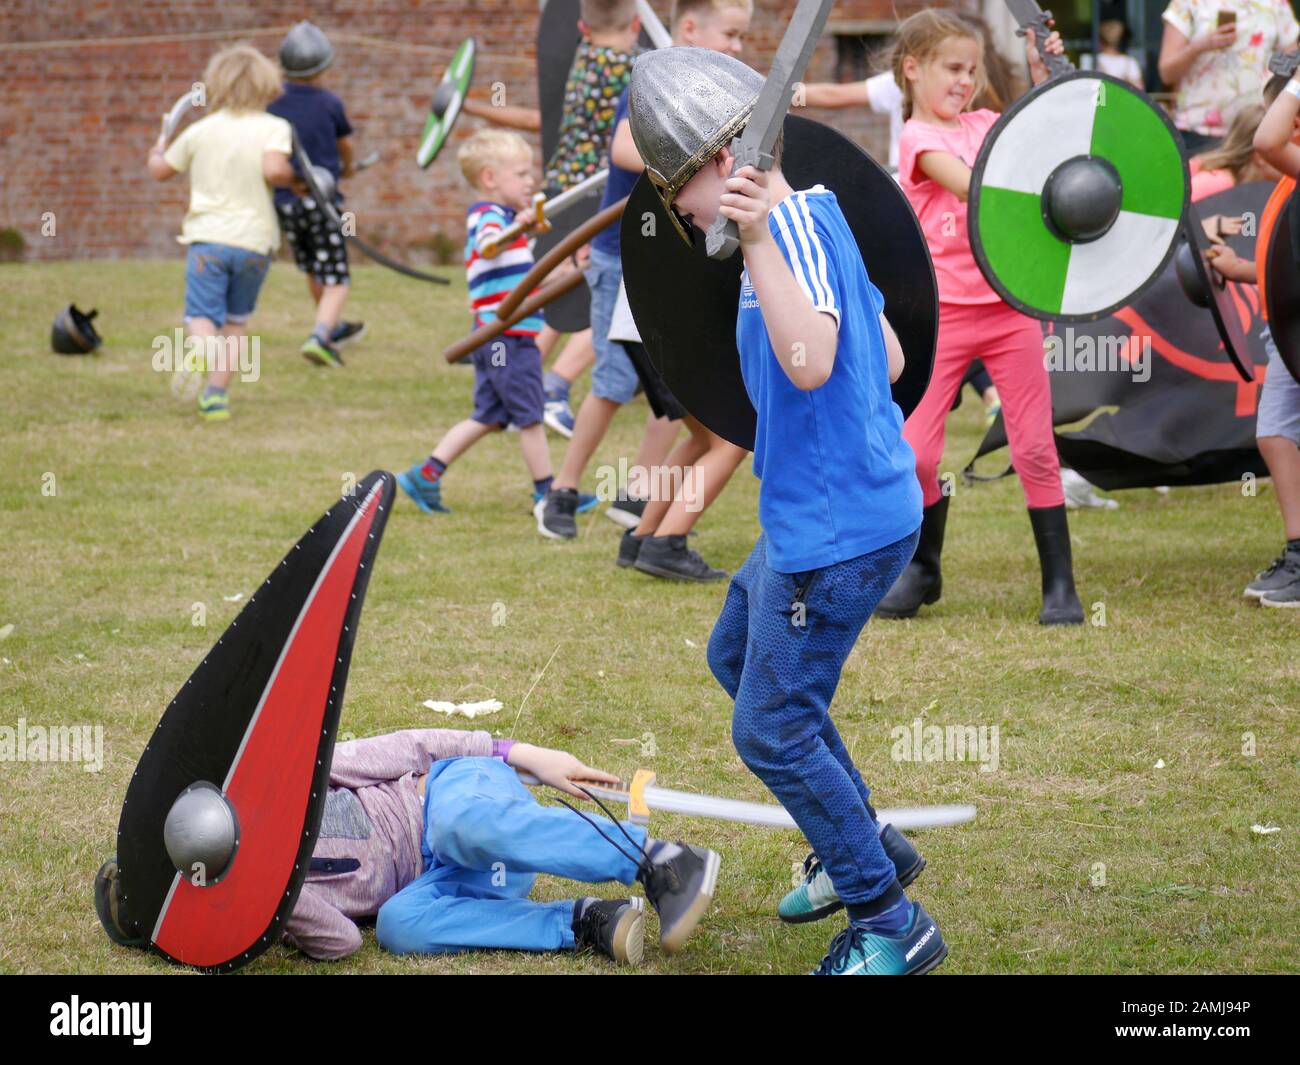 Children re-enacting a battle between Vikings and Saxons at an educational living history event Stock Photo